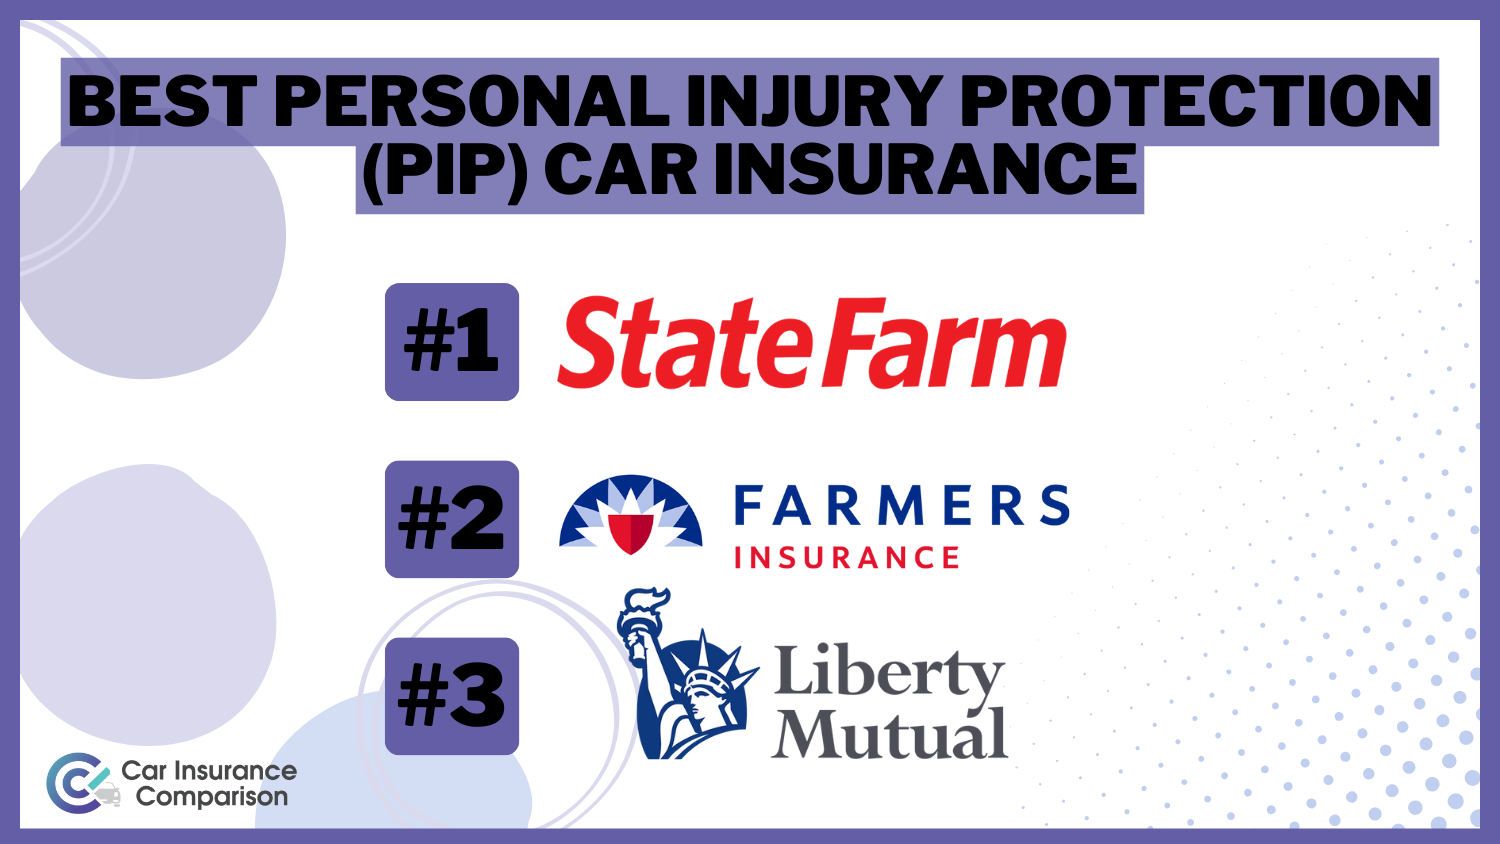 best personal injury protection car Insurance: State Farm, Farmers, Liberty Mutual